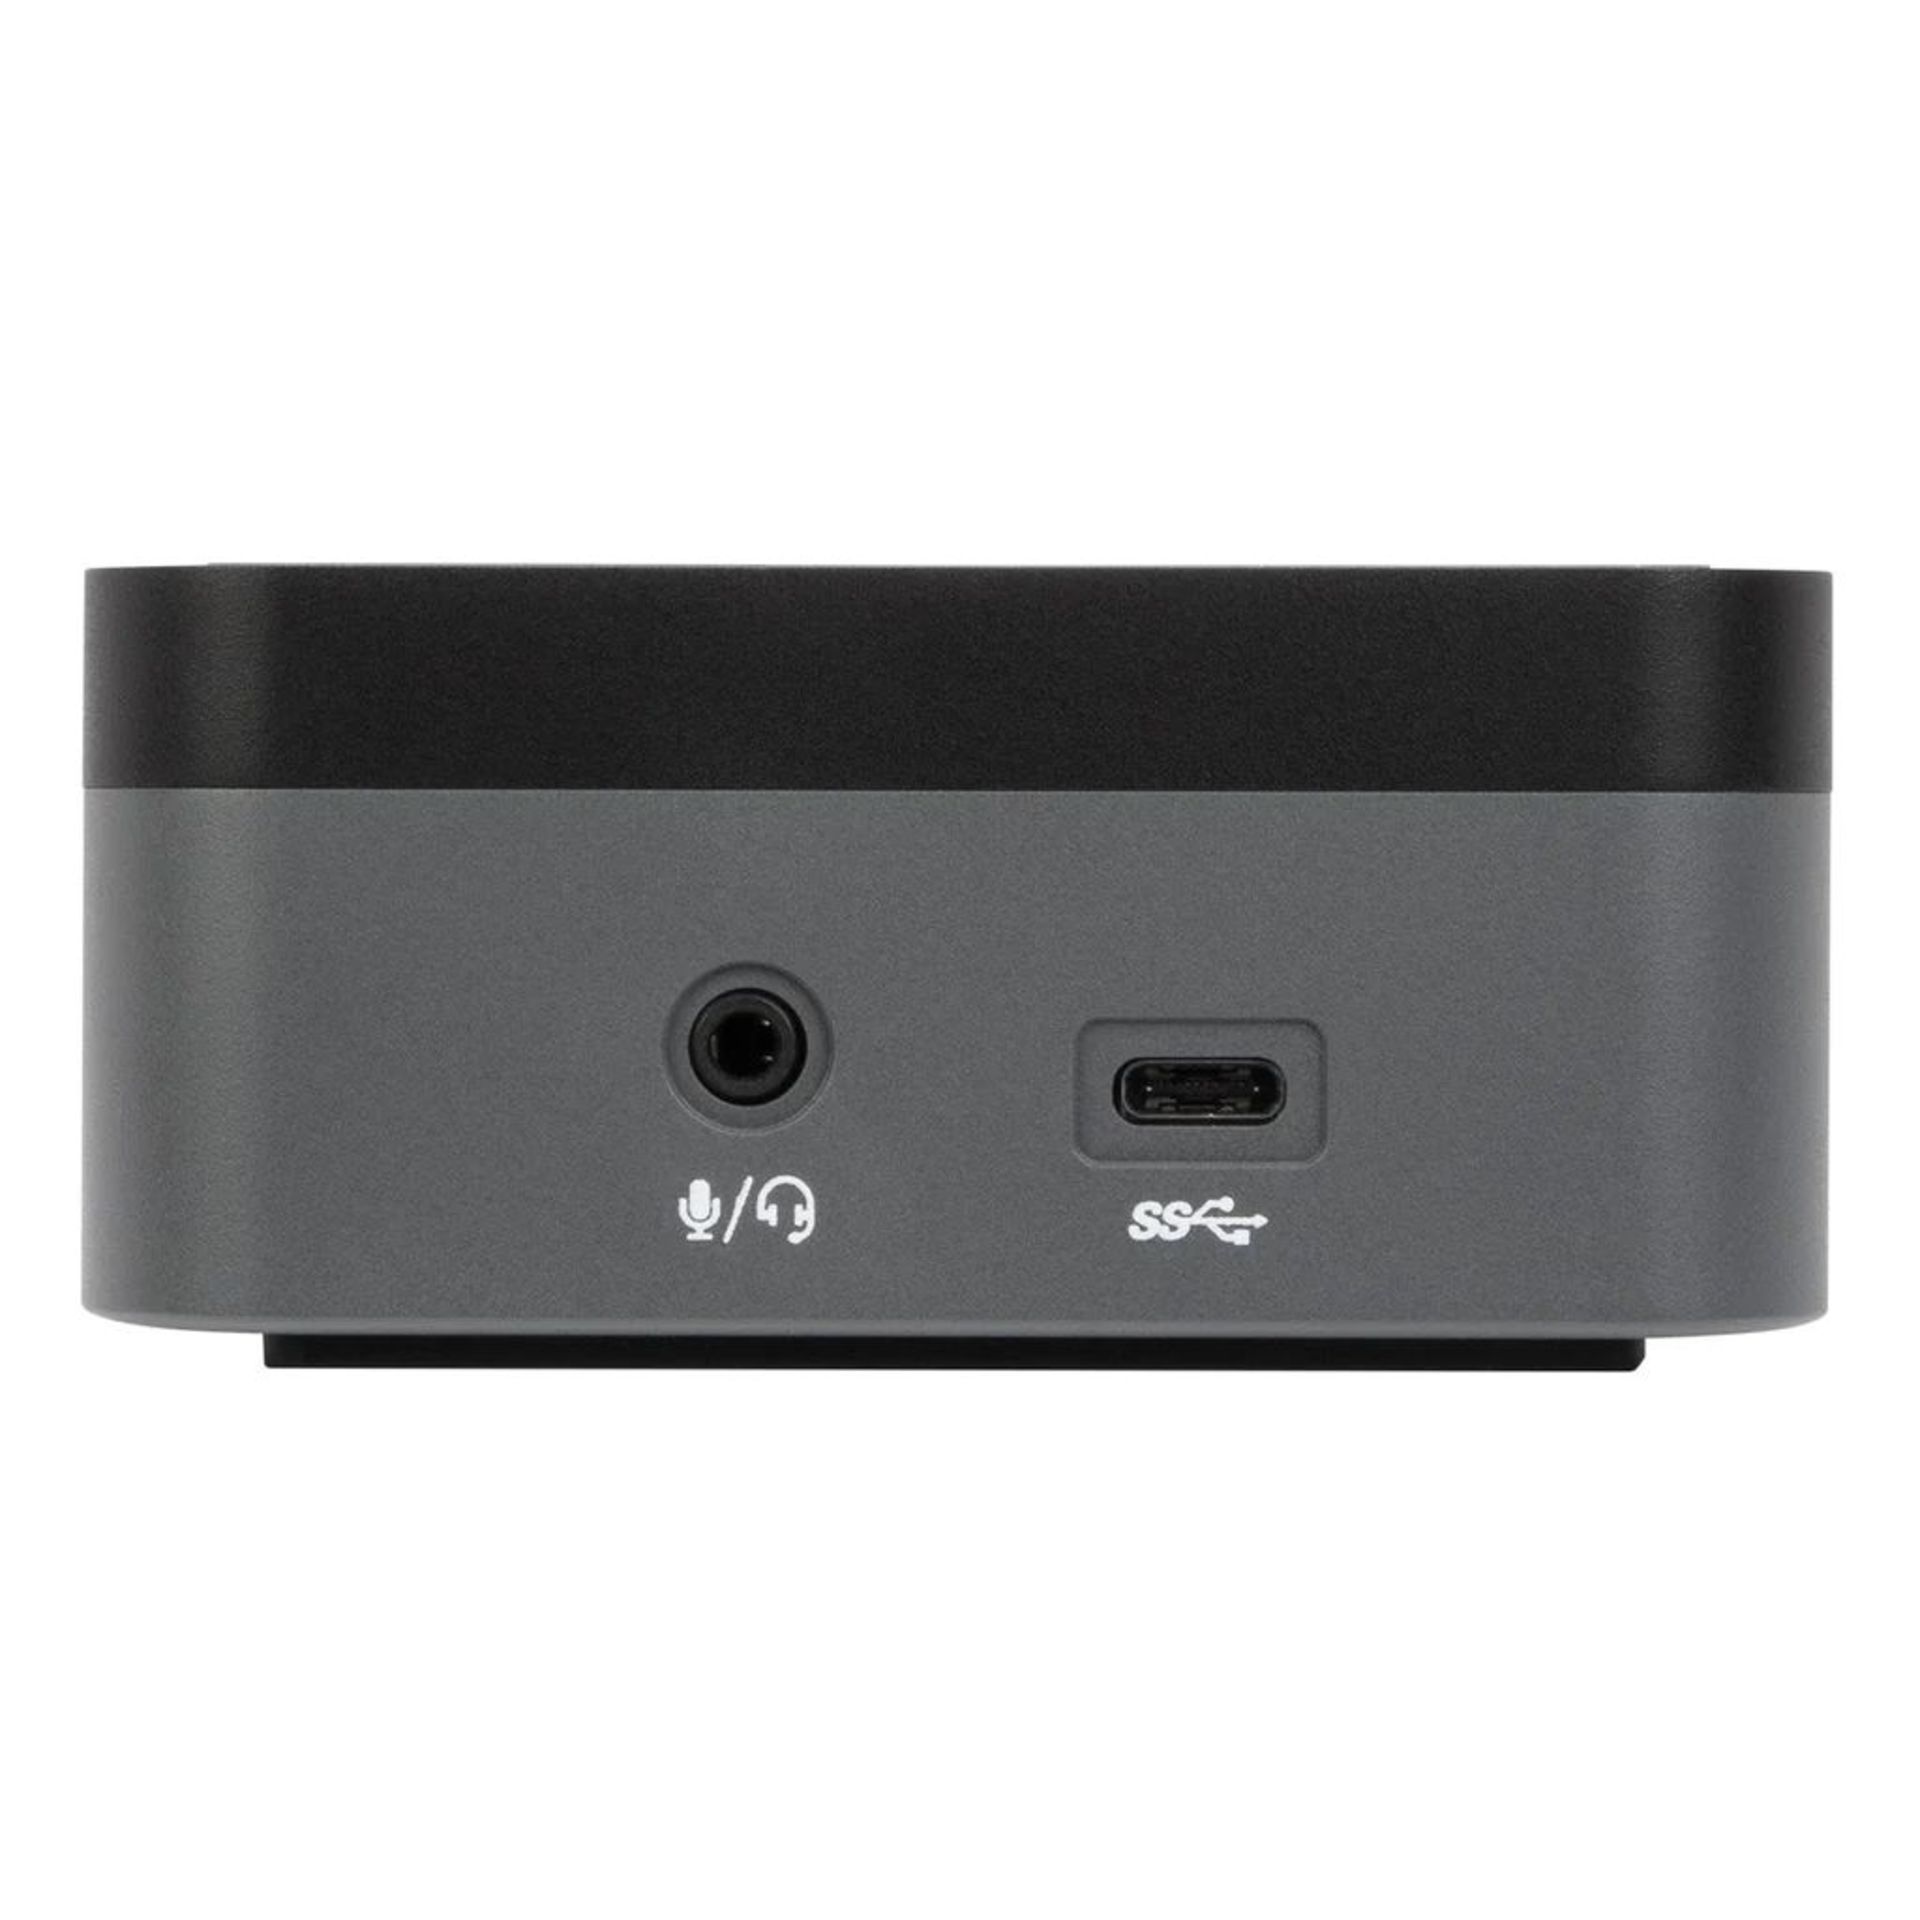 NEW & BOXED TARGUS Four Head 4K Dock With 100w Docking Station (DOCK570EUZ-82). RRP £351.89. Boost - Image 5 of 7